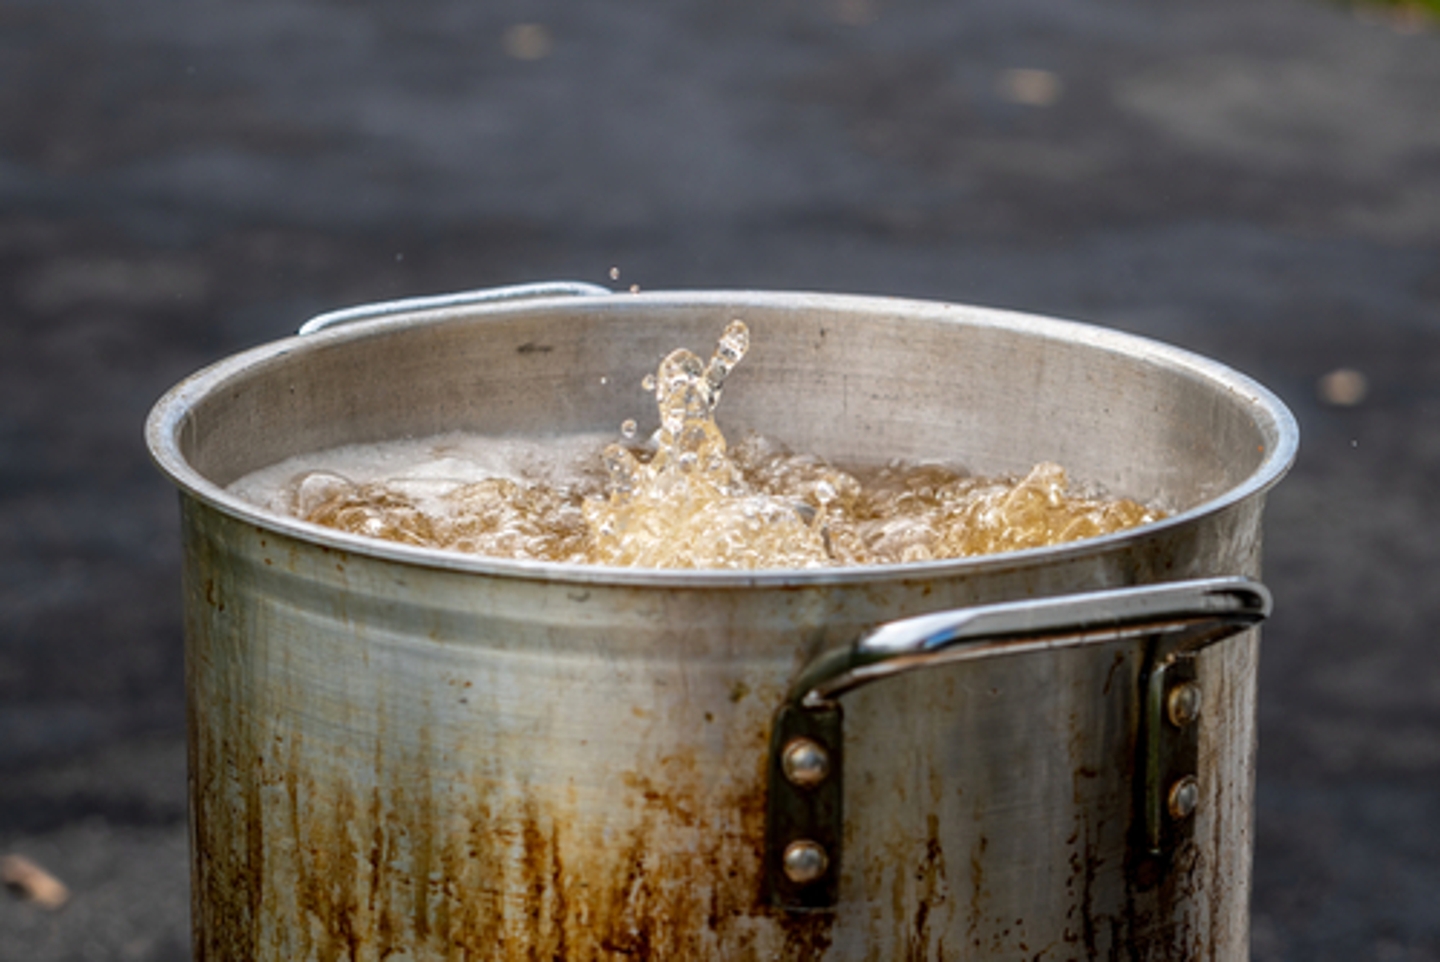 A turkey frying in a deep fryer. Make sure to follow all fire safety rules if you deep fry a turkey for the holidays.